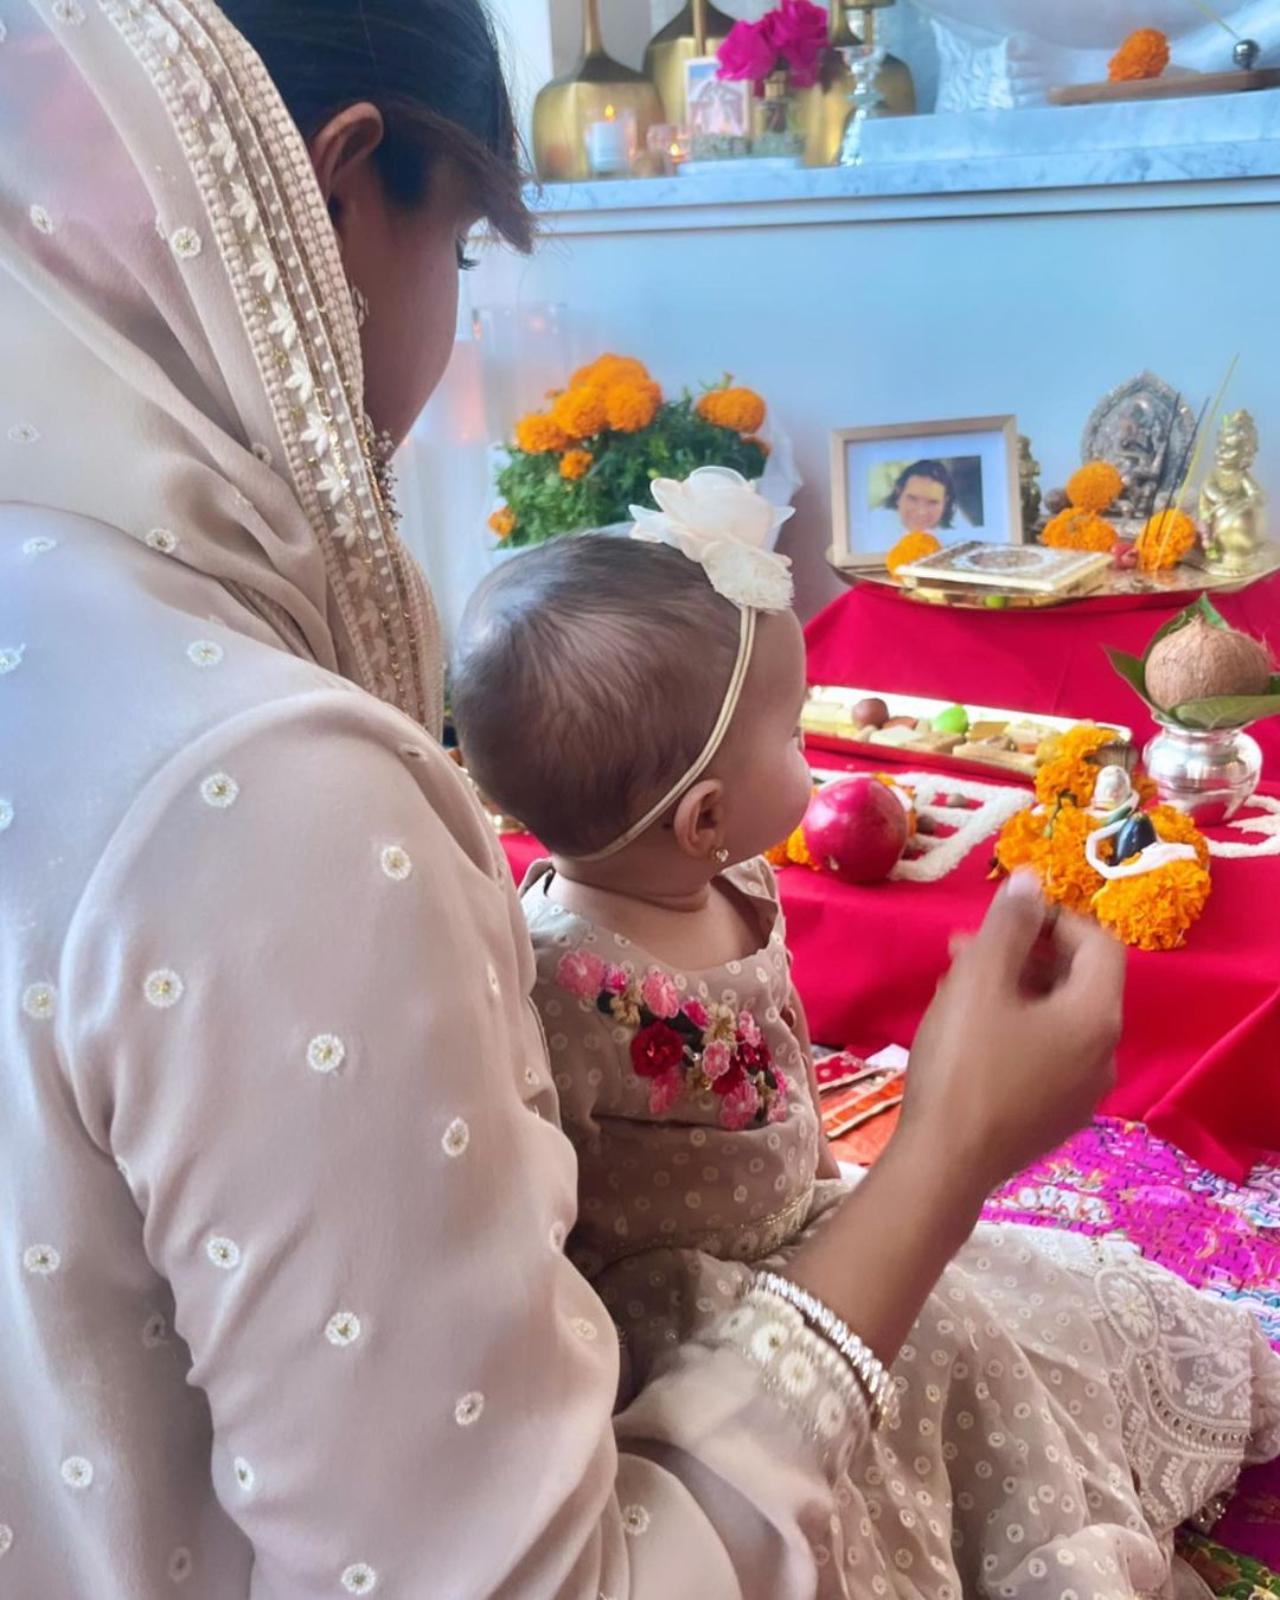 This year's Diwali marked the first for Priyanka and Nick's daughter Malti Marie. The little one was sitting on Priyanka's lap during Laxmi puja